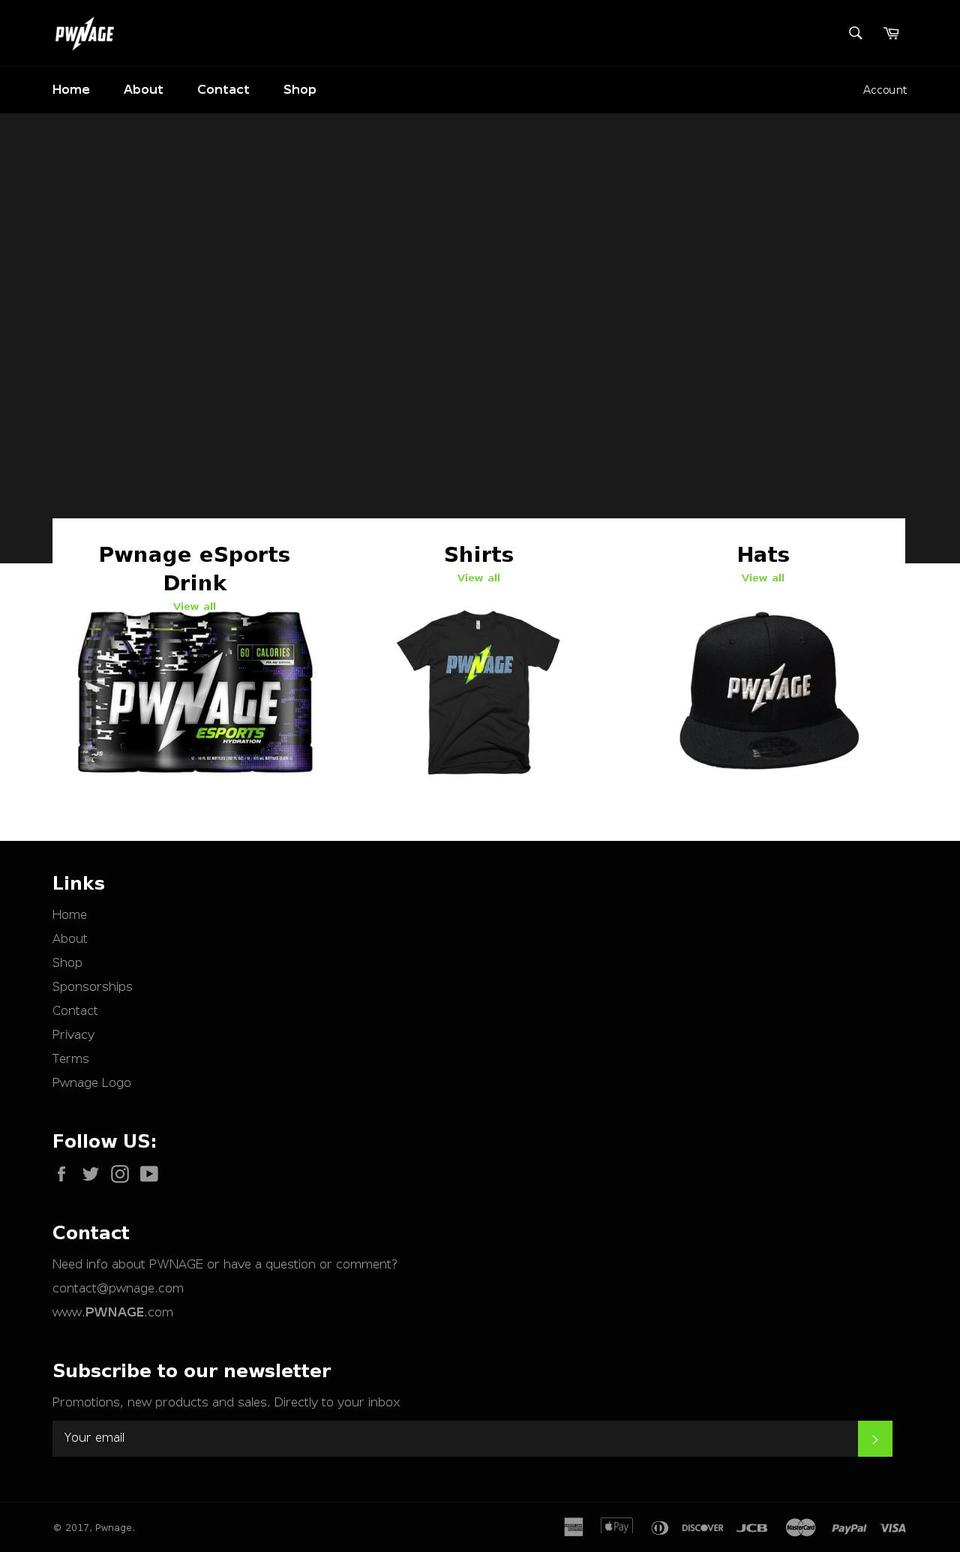 Pwnage v. New SB Sections Shopify theme site example pwnage.com